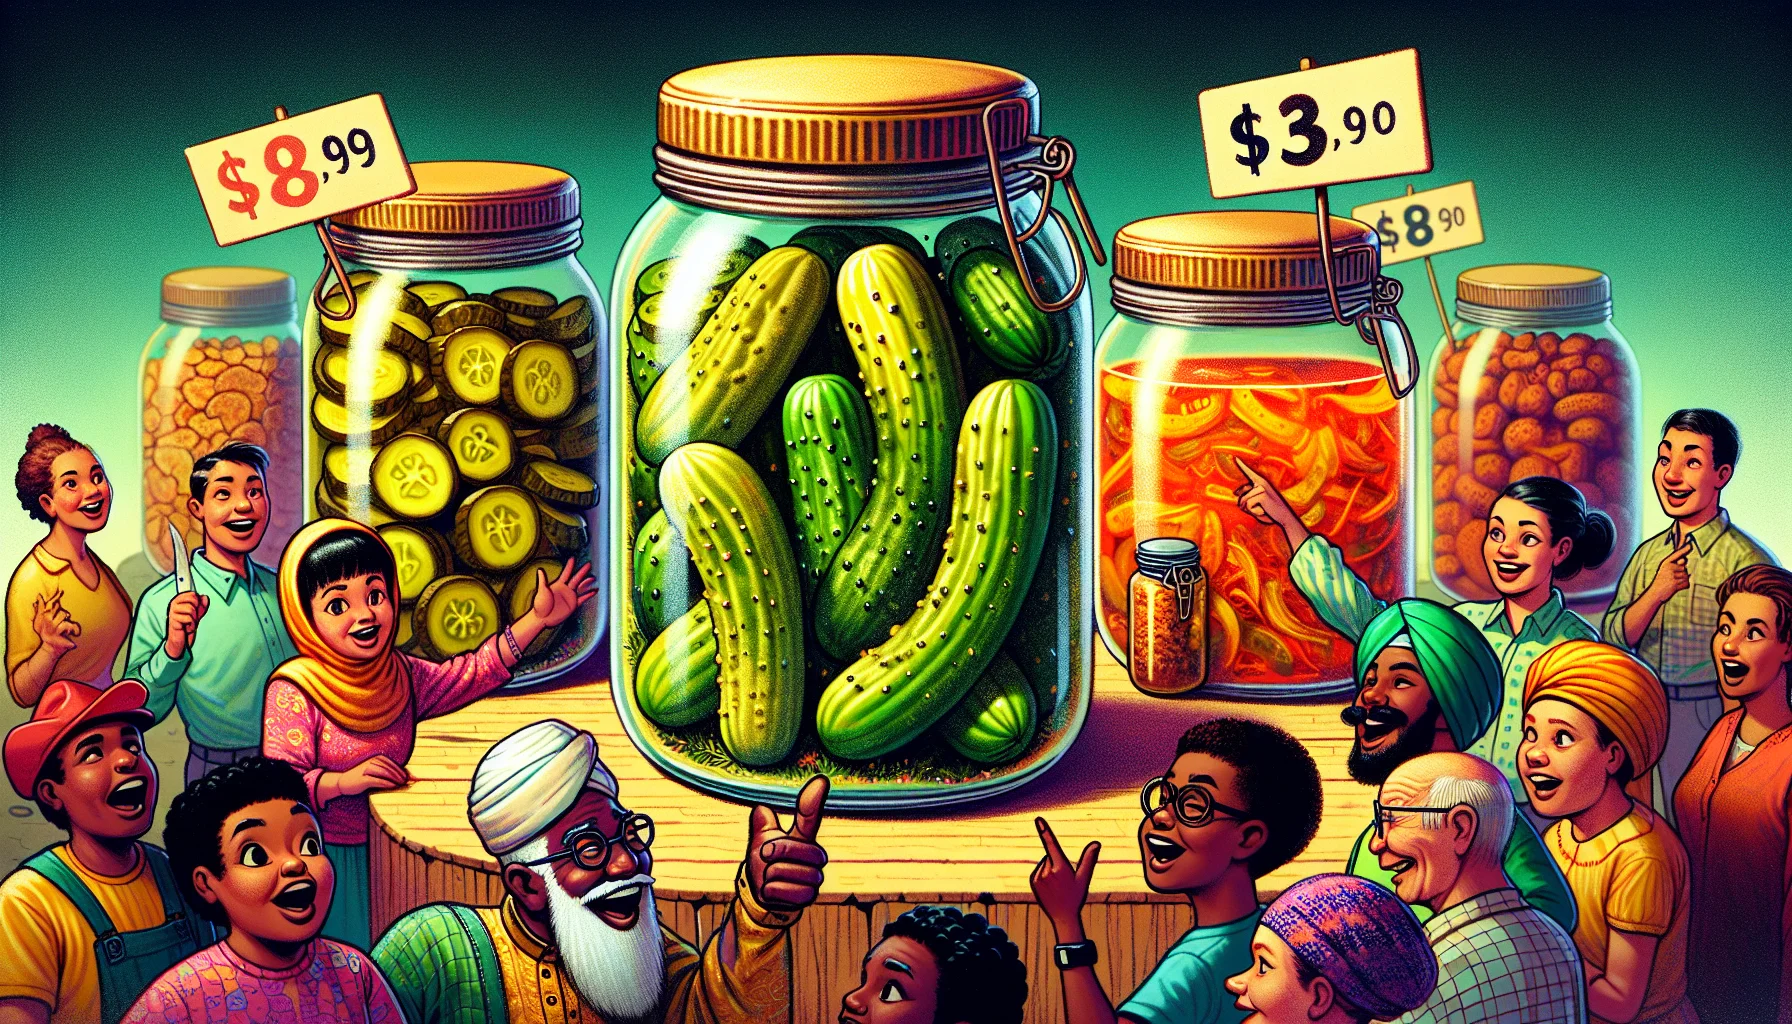 In a humorous scene, three distinct homemade pickle variations are featured as the main attraction. On the left, a glass jar is filled with traditional dill pickles, glowing vivid green. In the center, a vessel brimming with bread-and-butter pickles offer a sweet and tangy alternative. The rightmost jar houses a batch of spicy pickles, their distinctive red hue suggesting a fiery flavor profile. Cartoonish price tags hang from each jar depicting laughably low prices. Surrounding this display, an array of people with a mix of excitement and shock on their faces, a black woman holding a coin purse, a Caucasian man reaching out for a jar, a South Asian child pointing at the spicy pickles and a Hispanic elderly man chuckling at the prices.